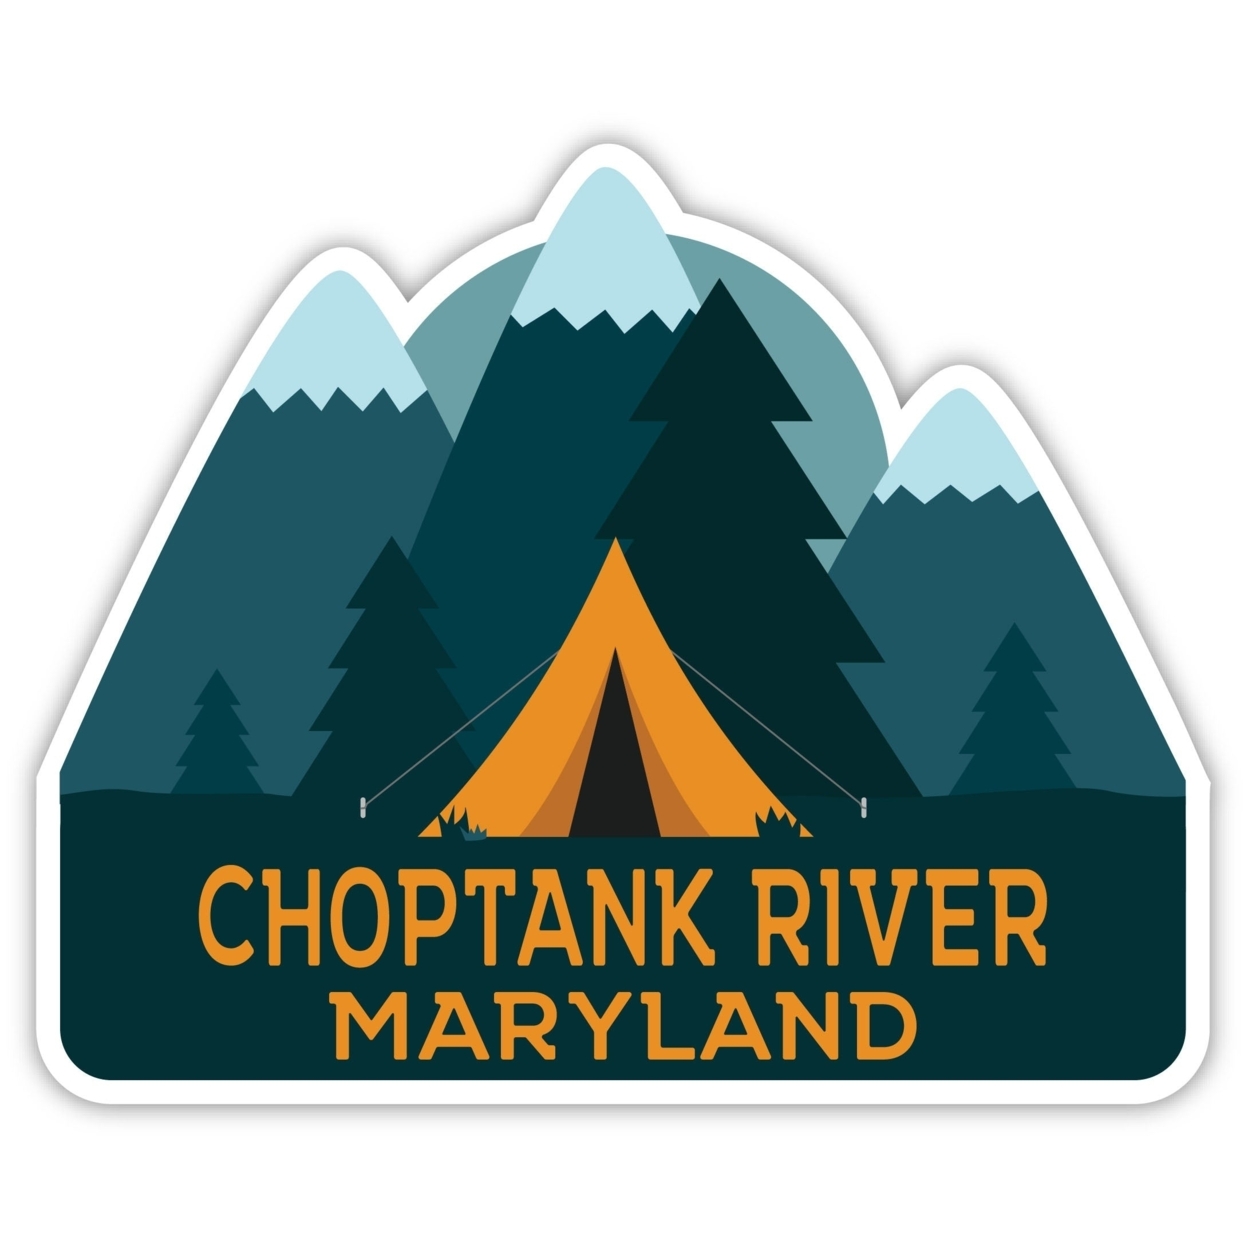 Choptank River Maryland Souvenir Decorative Stickers (Choose Theme And Size) - 4-Pack, 2-Inch, Tent